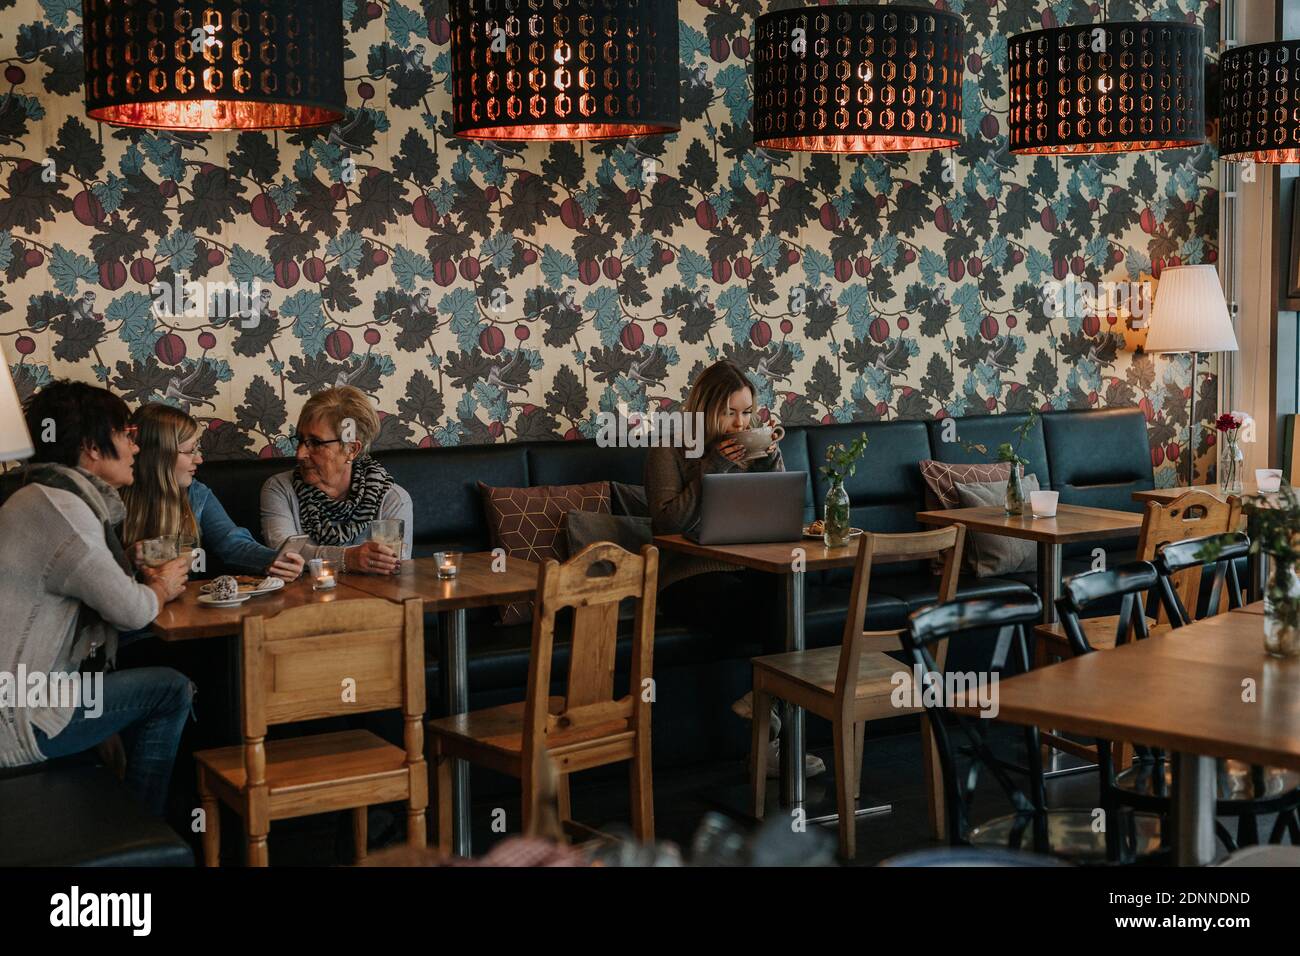 People sitting in cafe Stock Photo